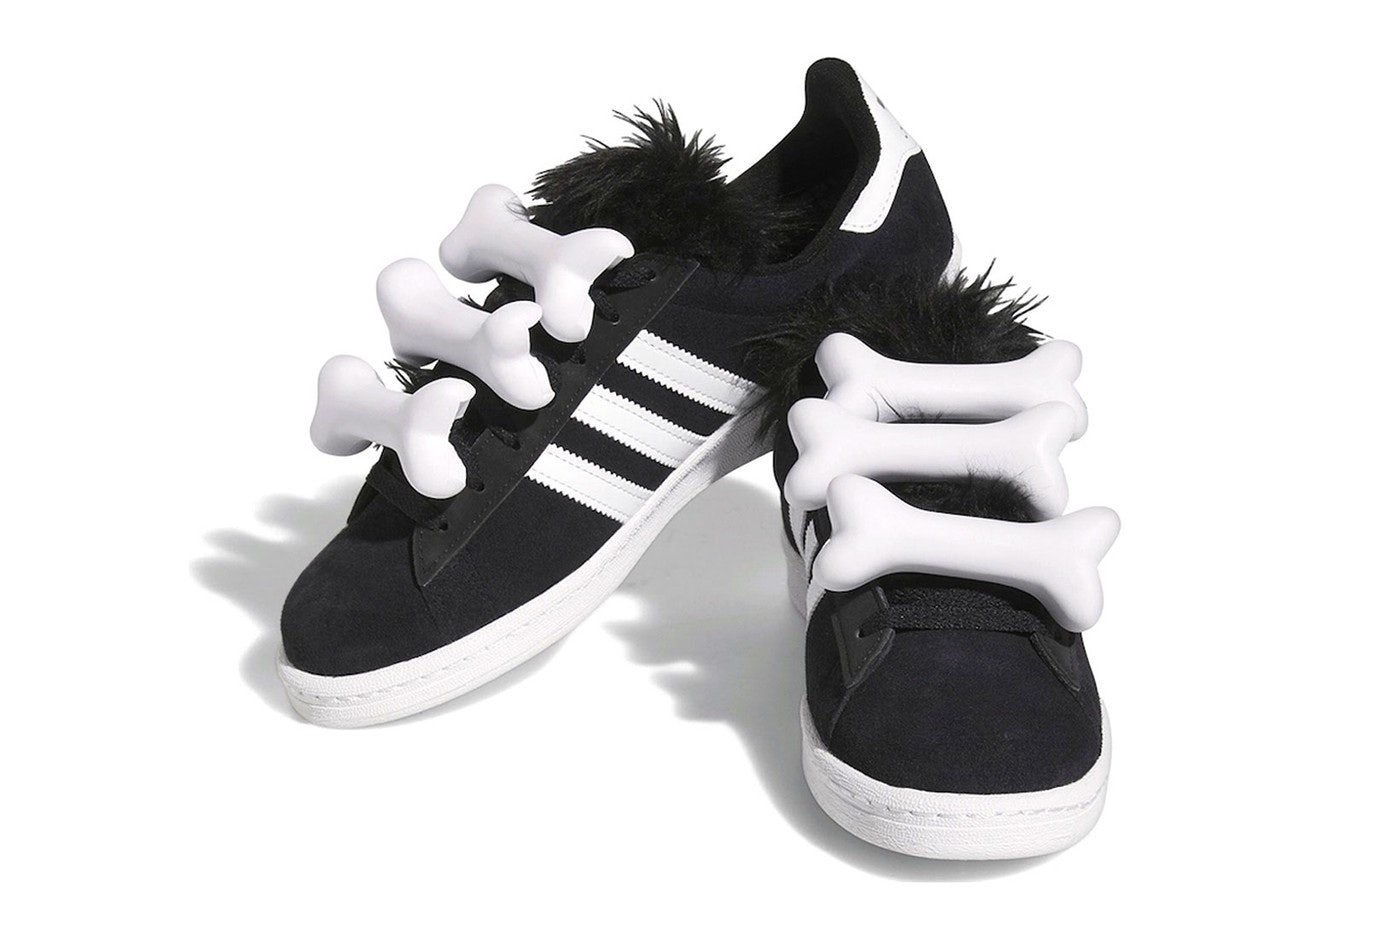 The latest Jeremy Scott x Adidas sneakers come in black and pink. Photo: Jeremy Scott x Adidas